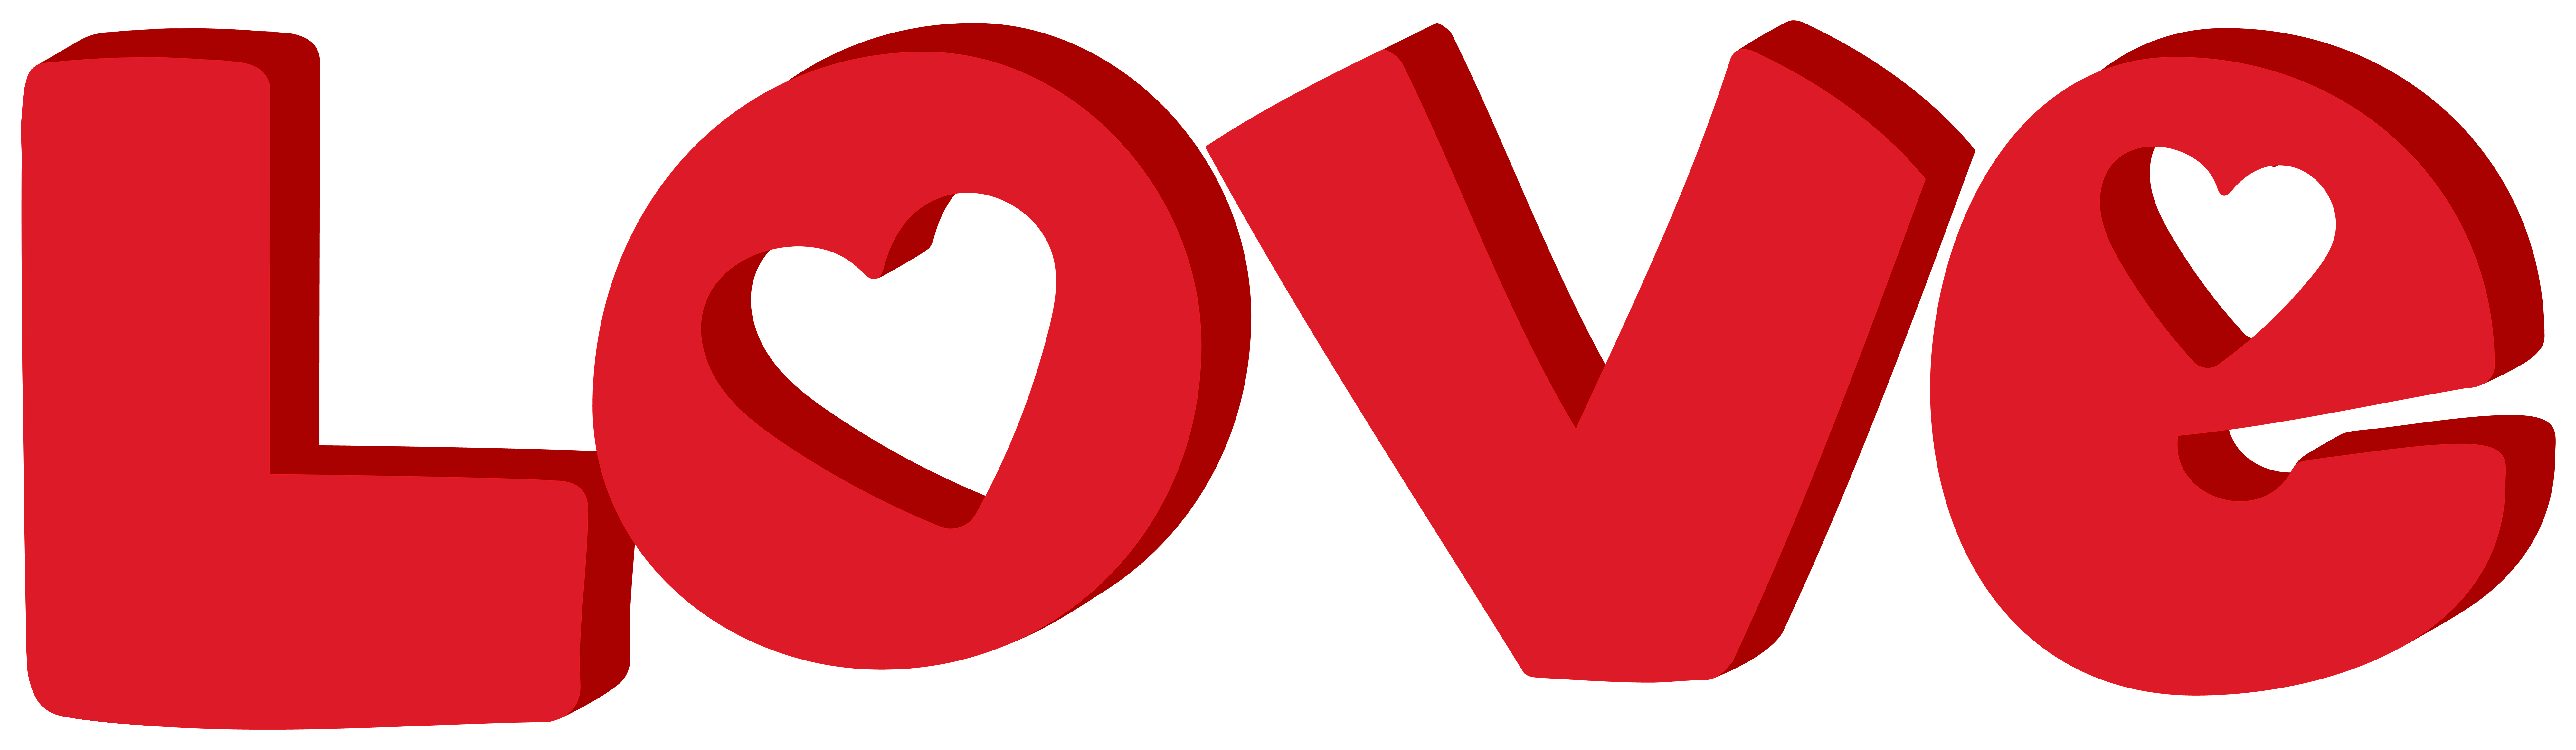 https://gallery.yopriceville.com/var/albums/Free-Clipart-Pictures/Valentine%27s-Day-PNG/Love_Red_Transparent_Image.png?m=1550177370